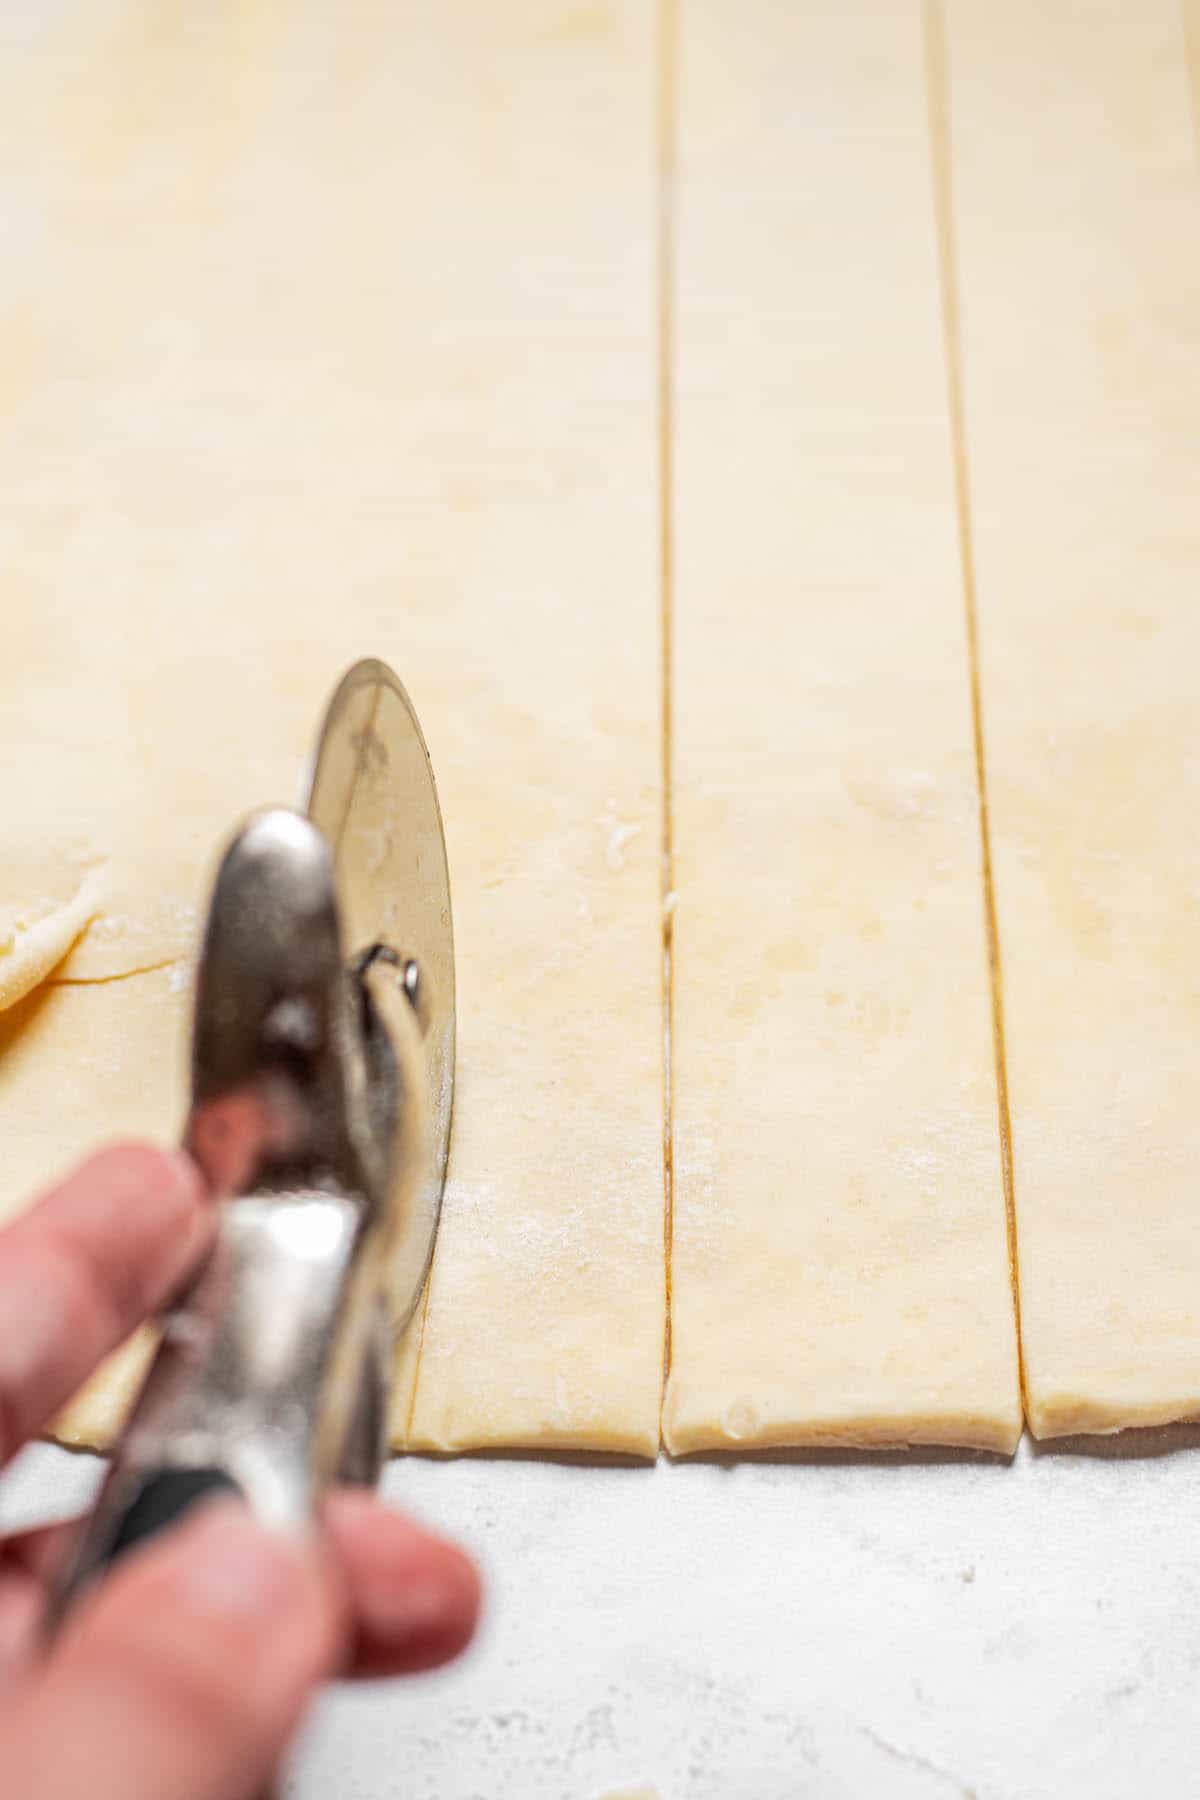 pastry being cut.